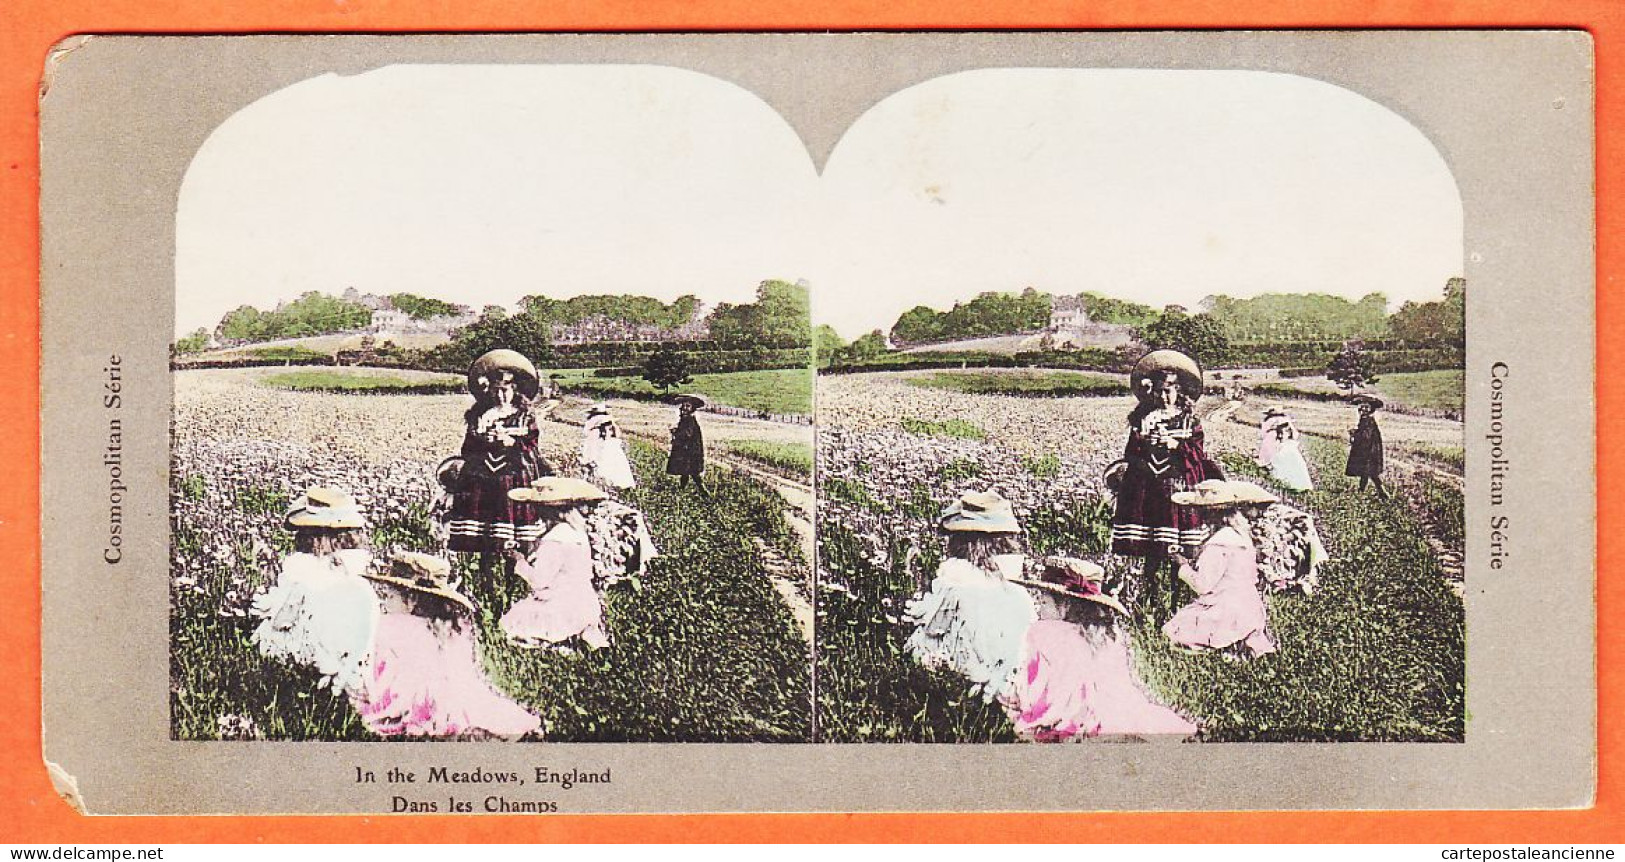 04575 / ENGLAND In The Meadows ANGLETERRE Dans Les Champs 1890s Stereo-Views COSMOPOLITAN Serie - Stereo-Photographie